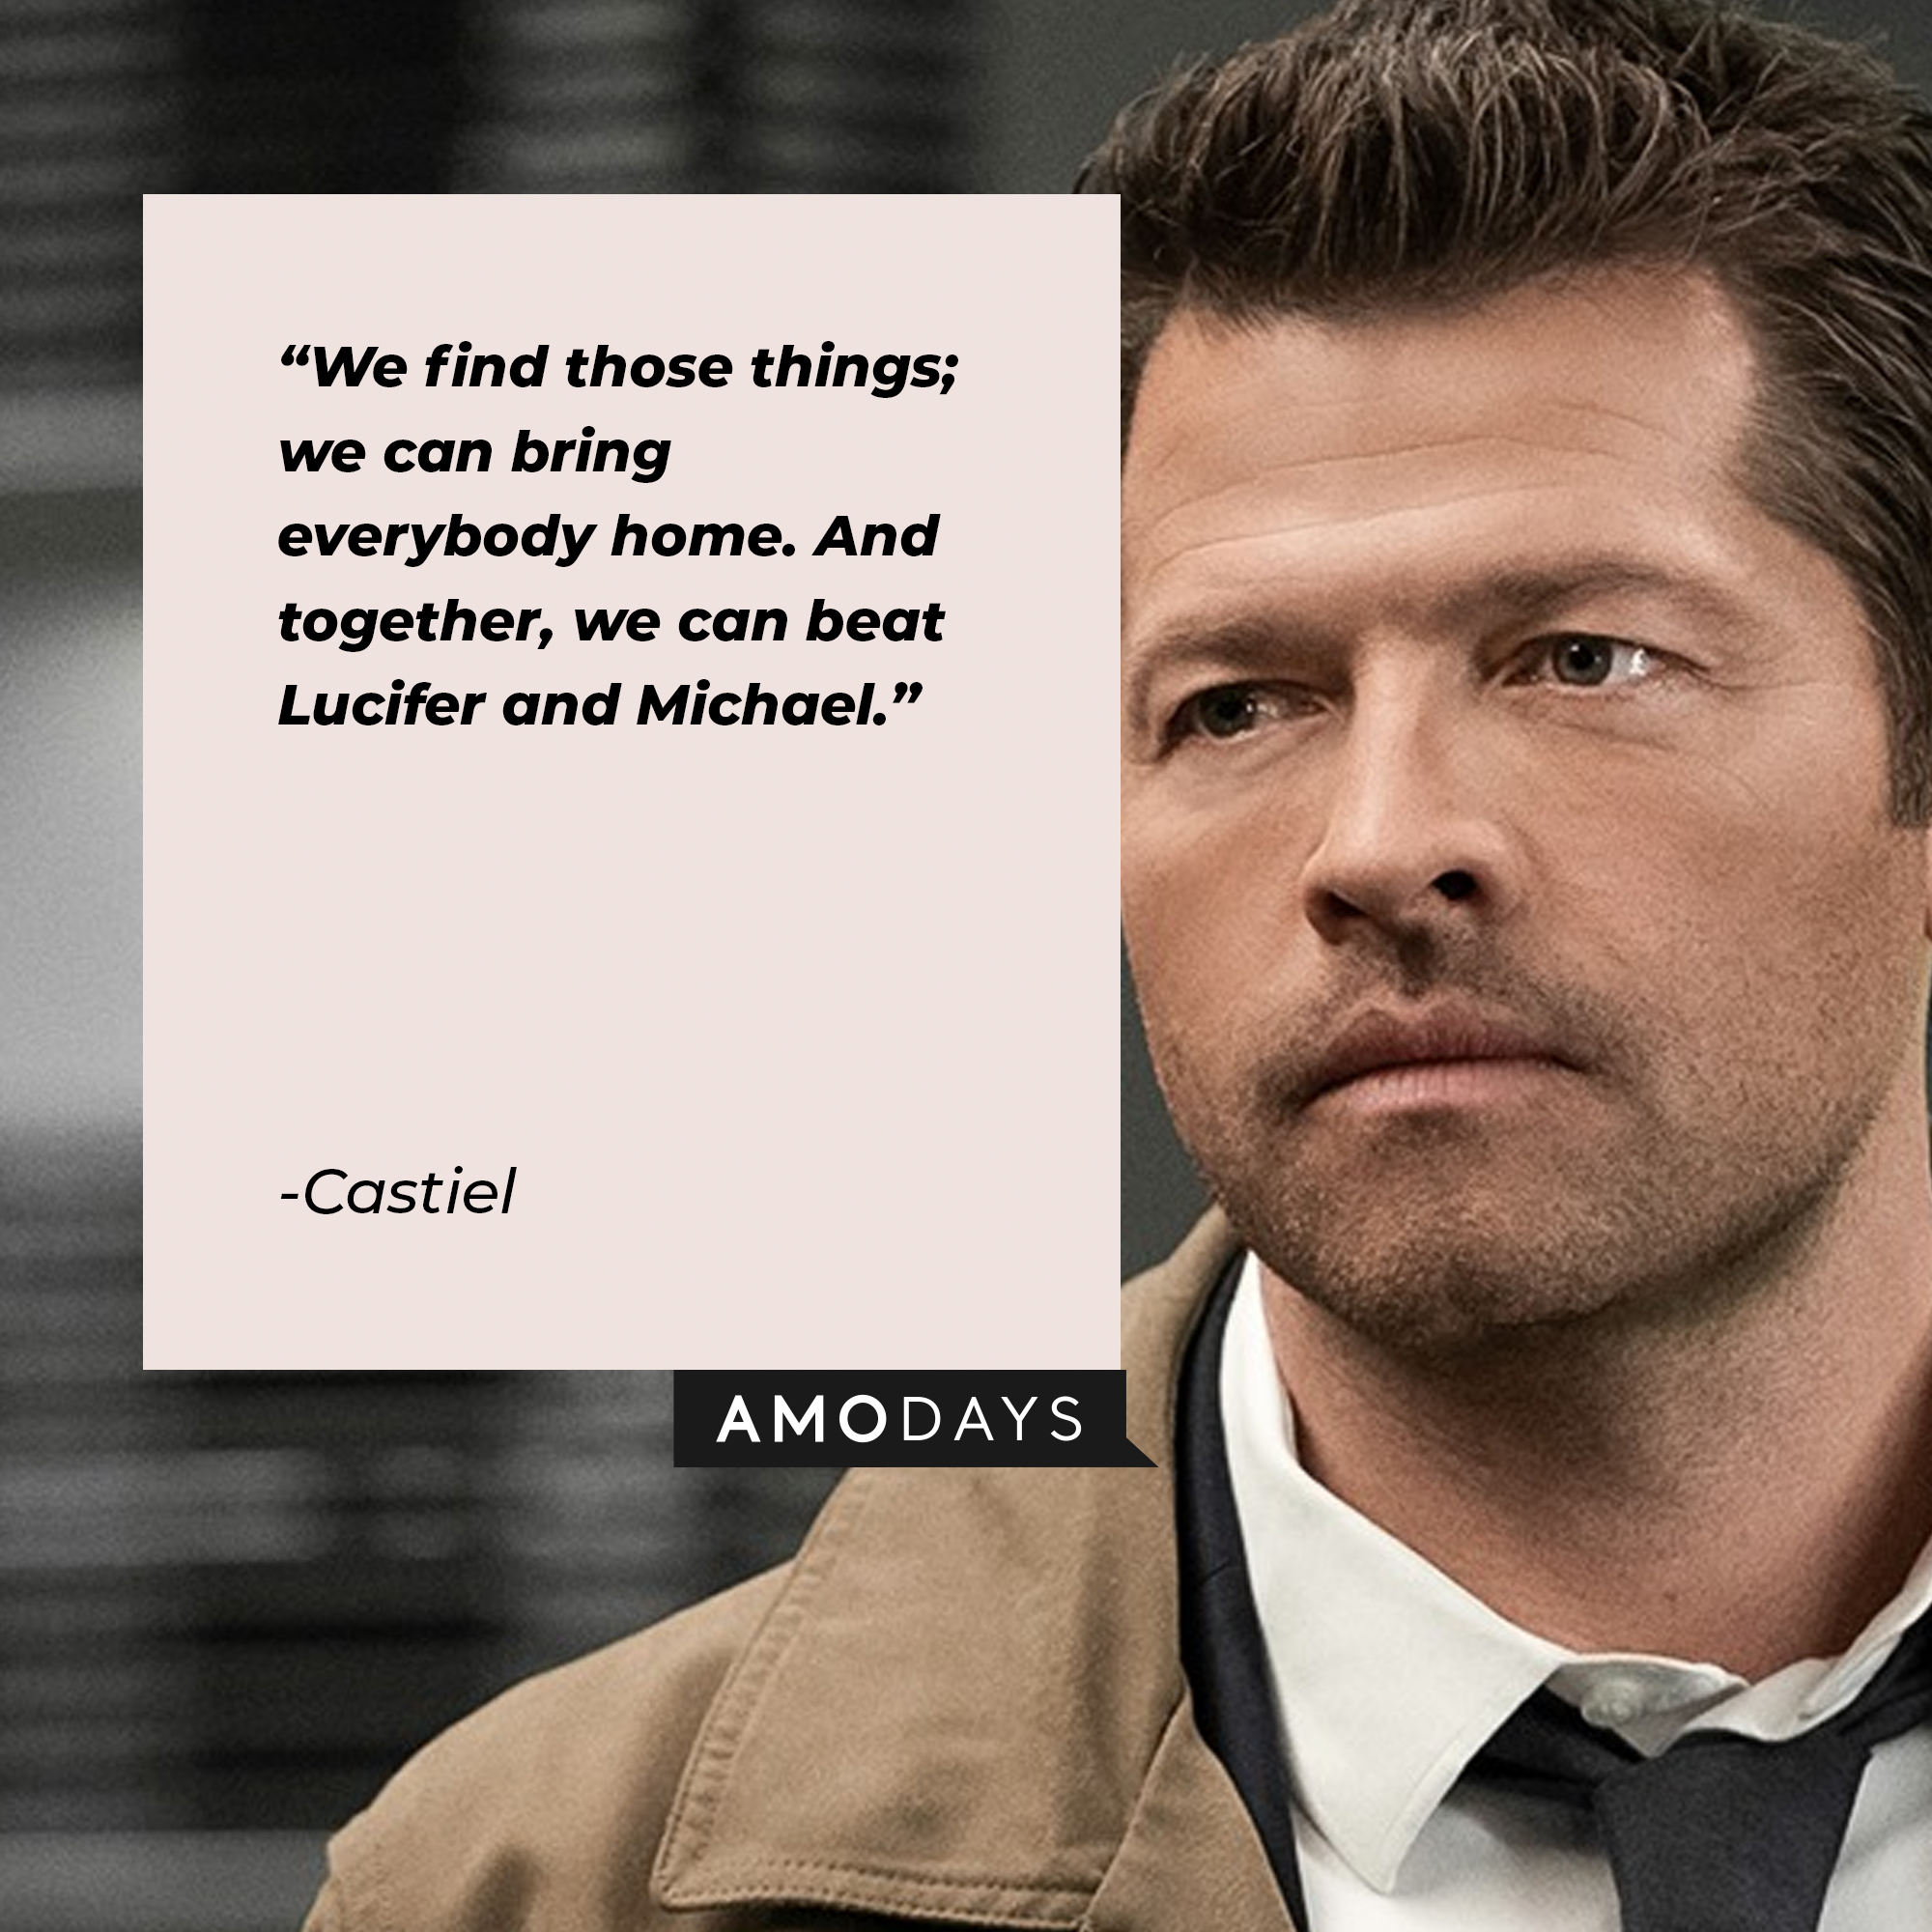 An image of Castiel with his quote: "We find those things; we can bring everybody home. And together, we can beat Lucifer and Michael." | Source: facebook.com/Supernatural